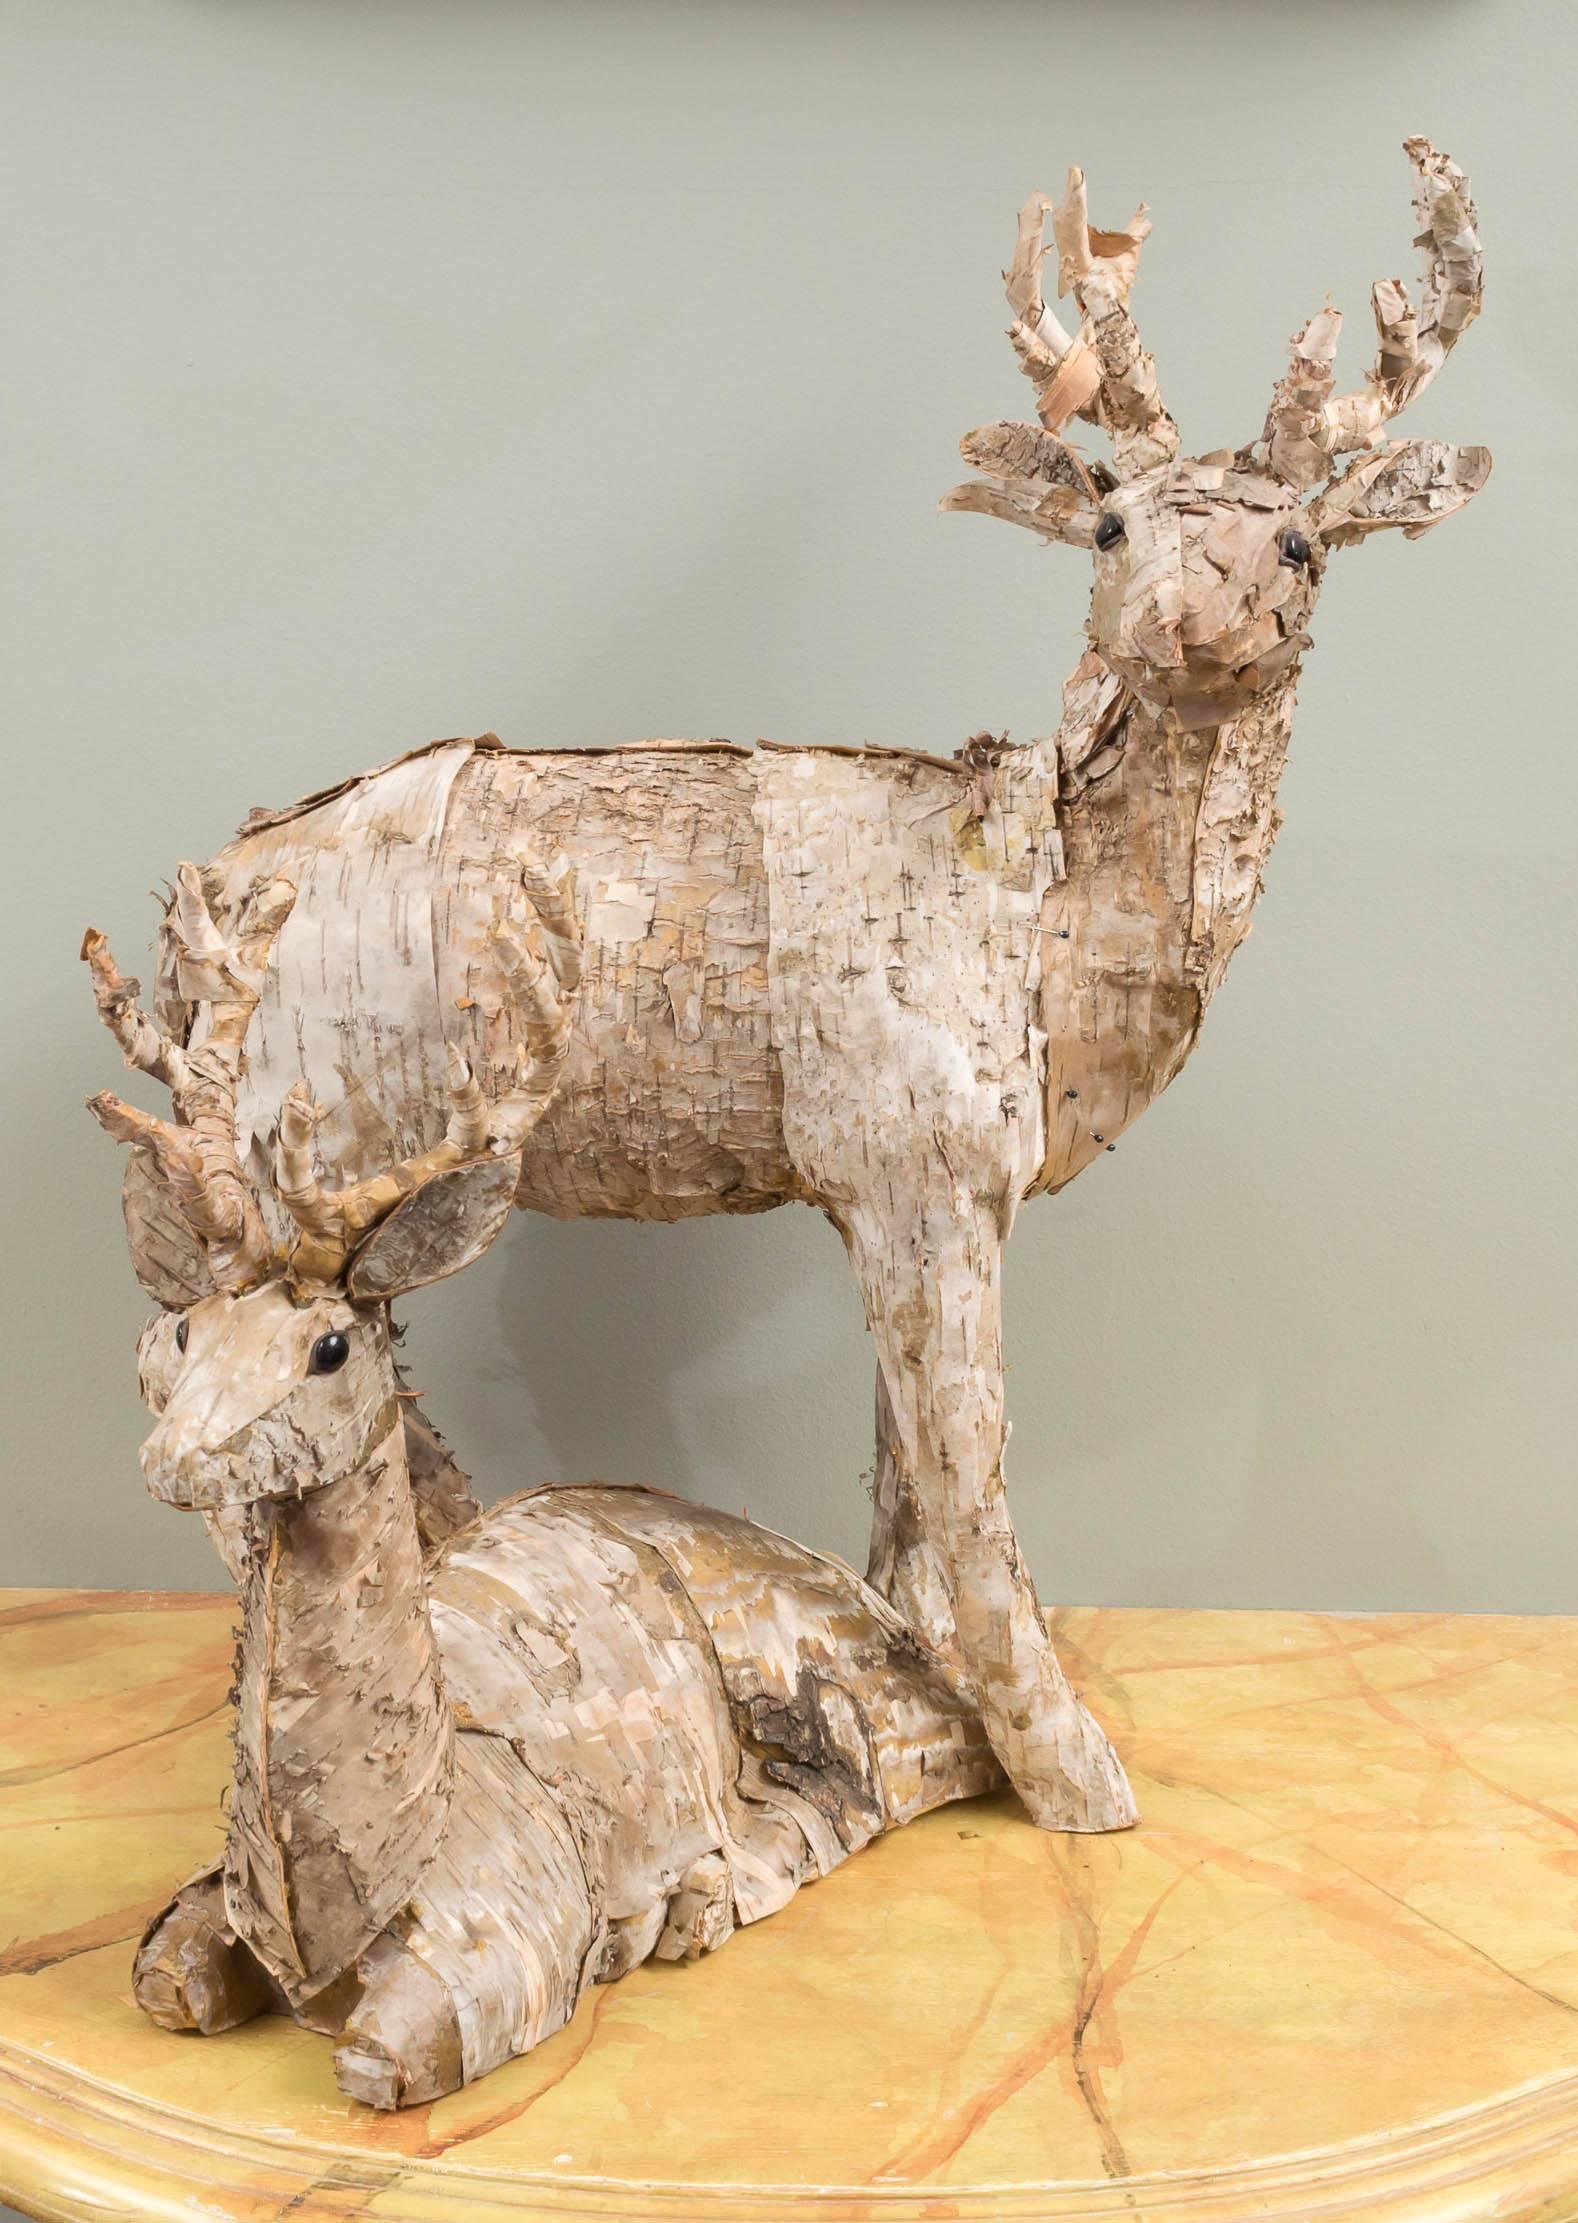 Each covered in birch bark with black eyes. The first, standing guard in an alert posture with outstretched antlers; the second, reposed in a relaxed manner.